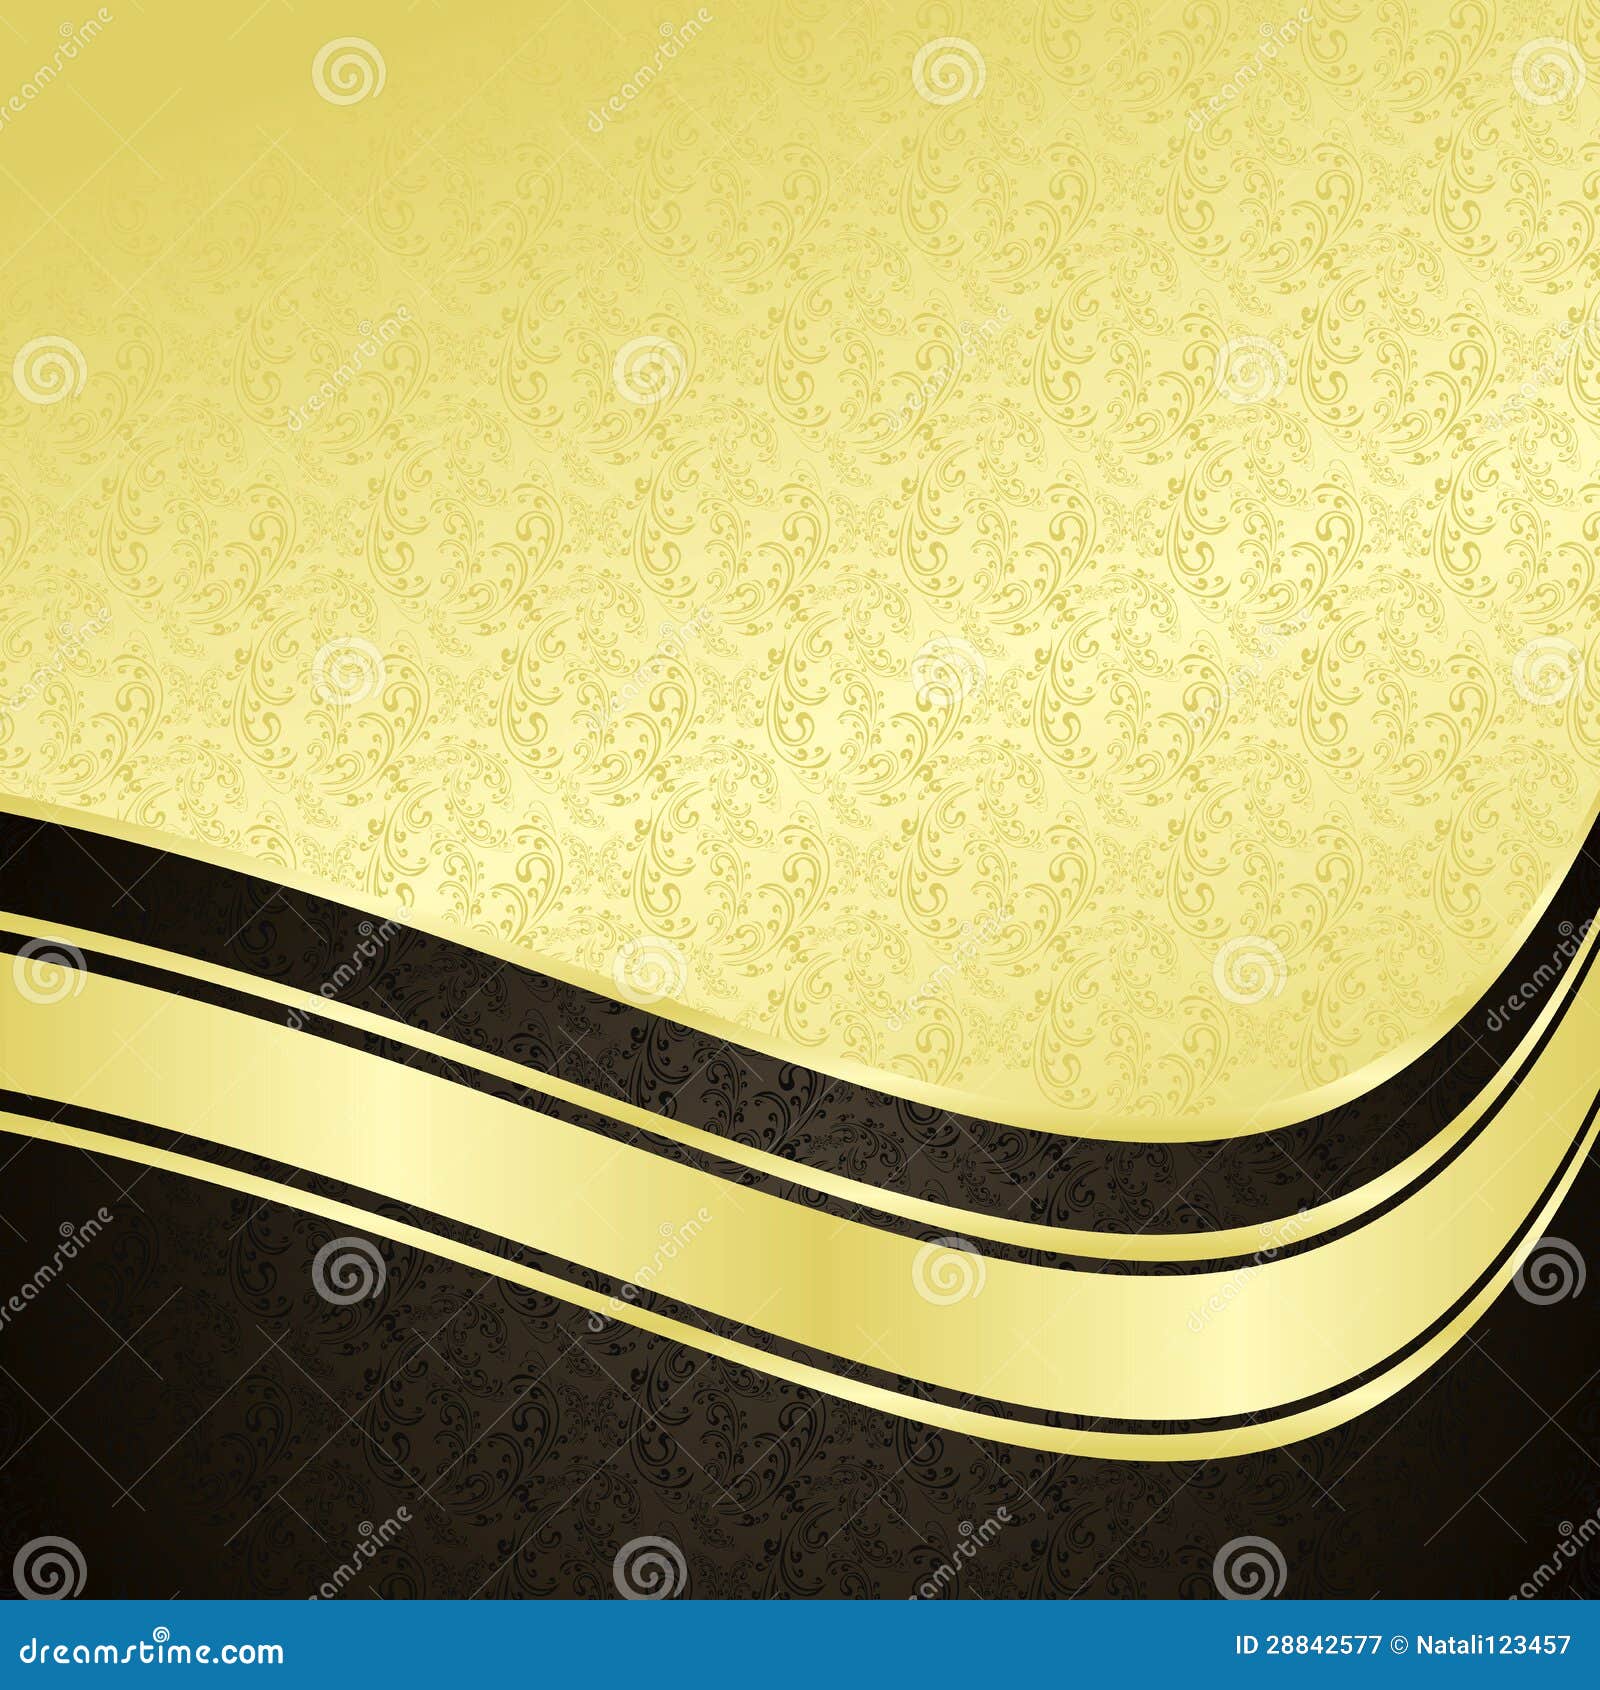 Luxury Background: Gold and Black. Stock Vector - Illustration of